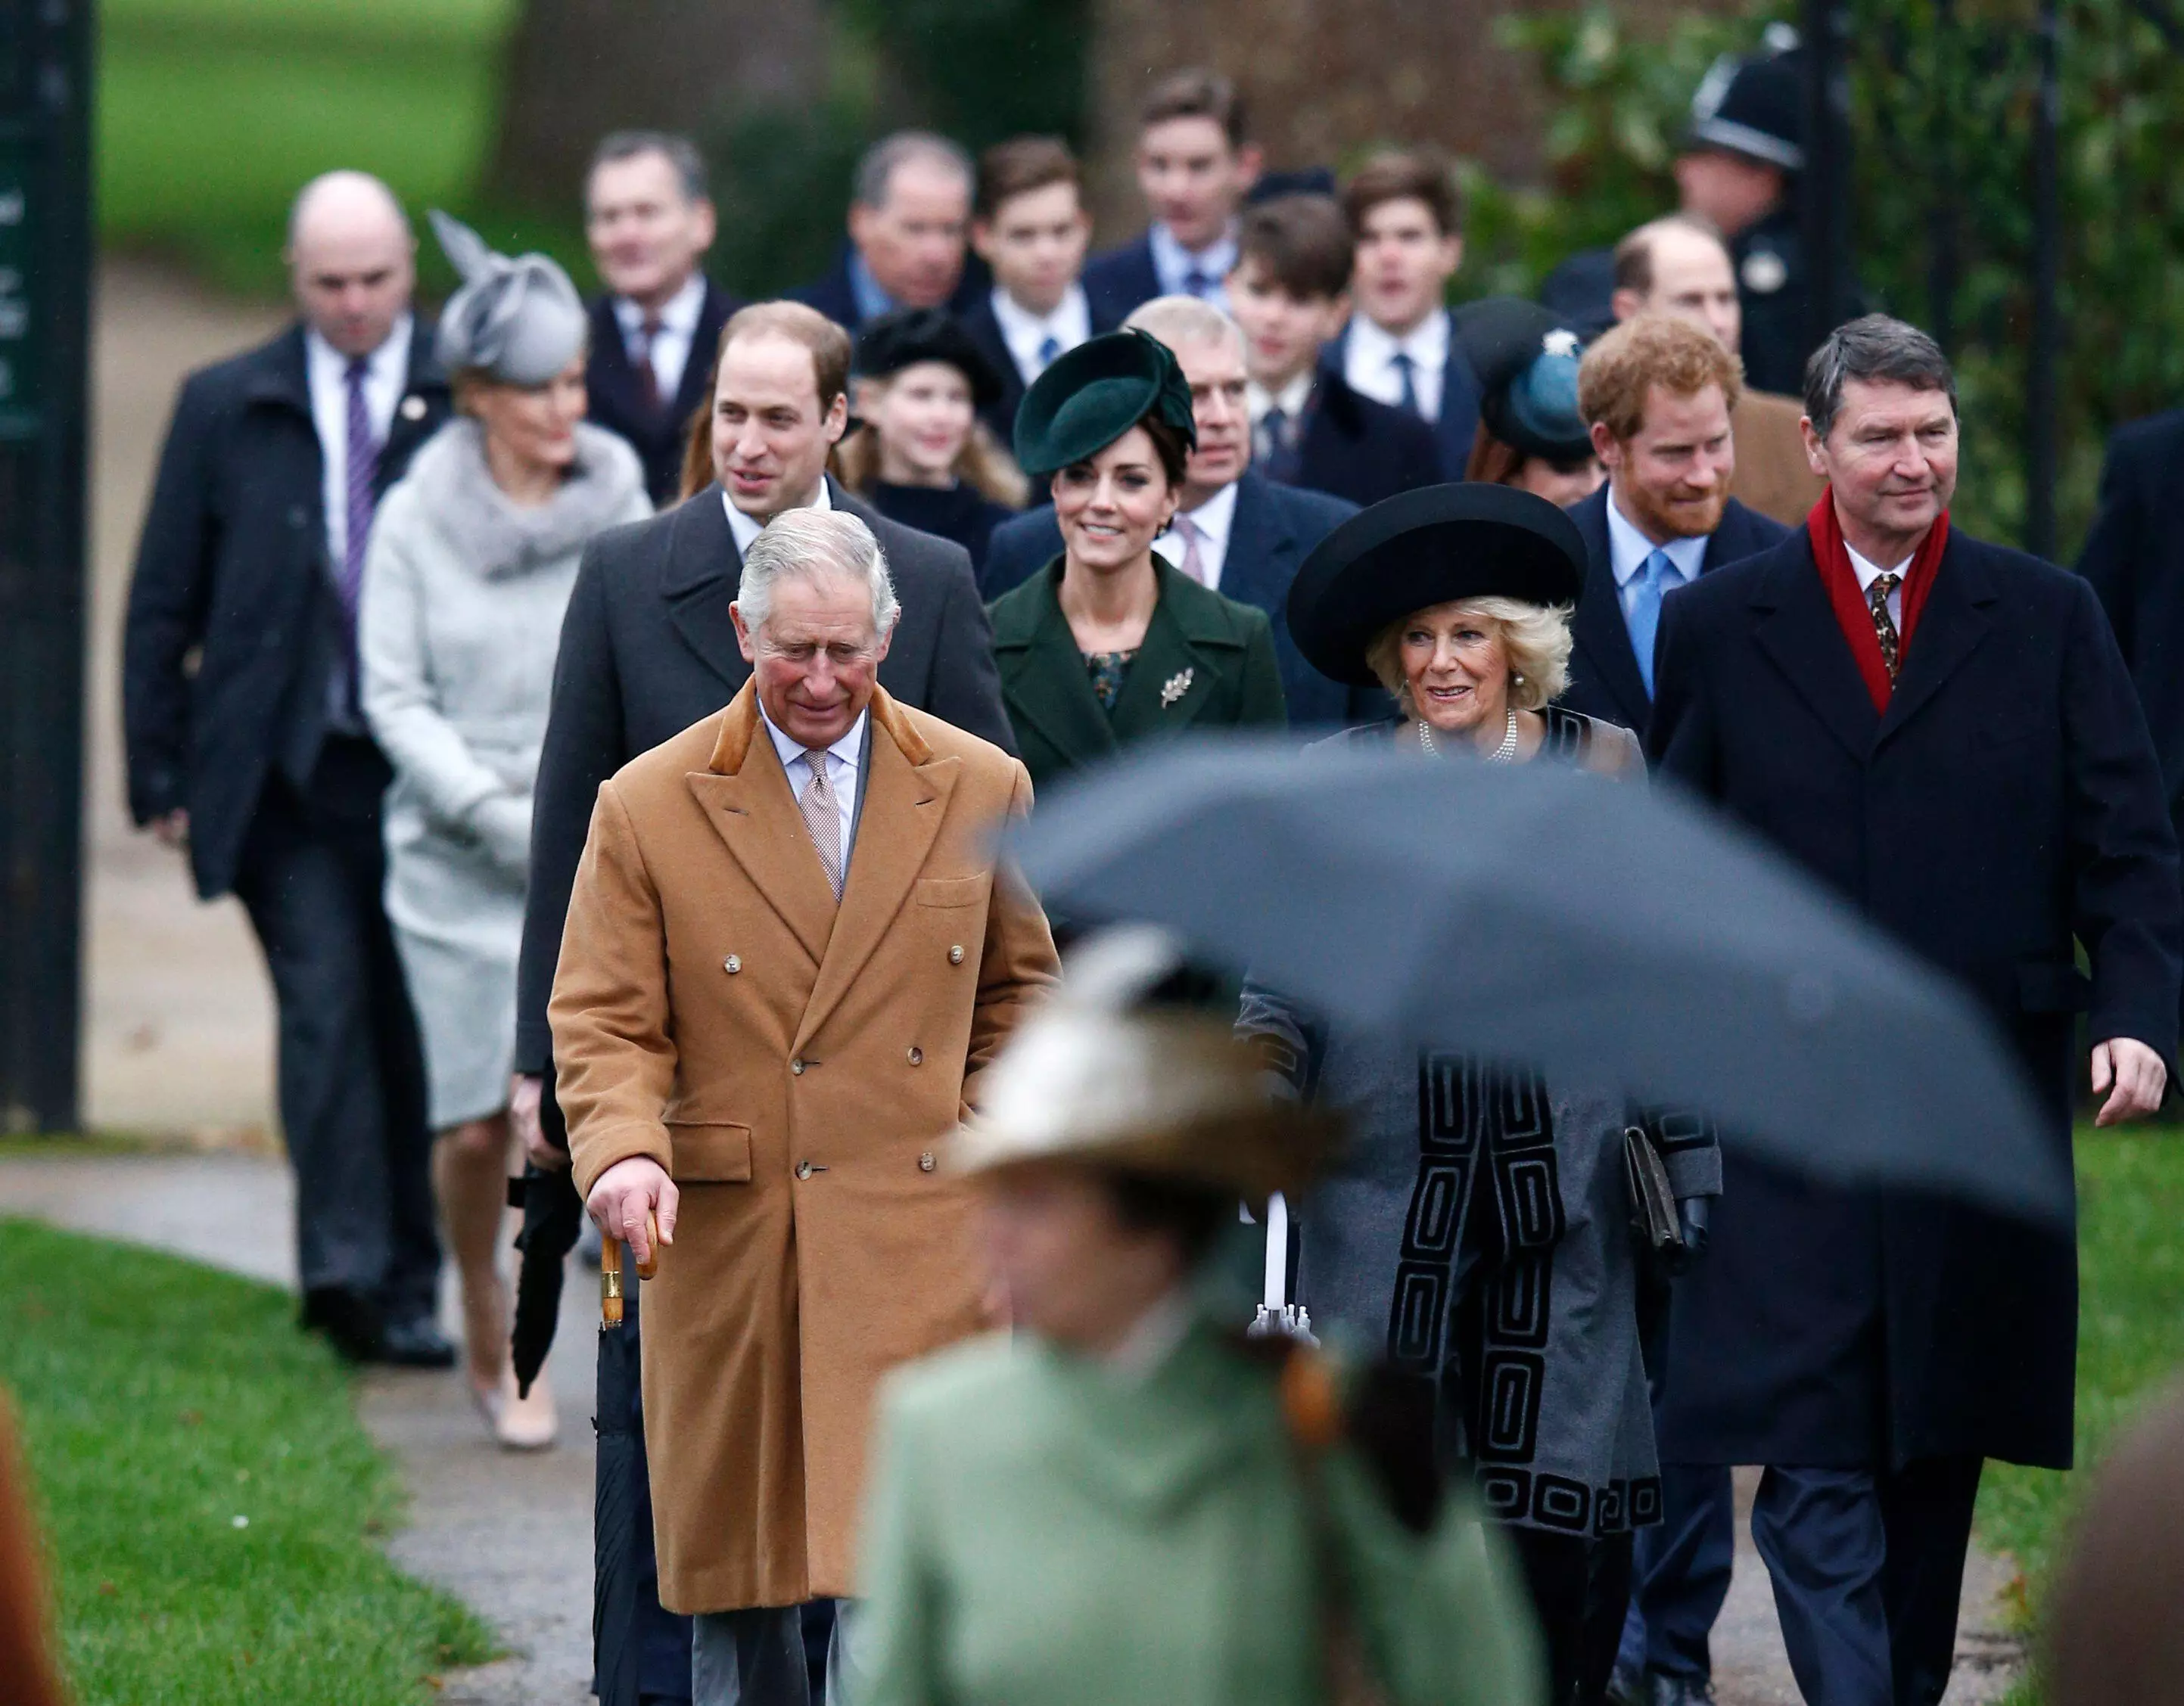 The Royal Family attending a Christmas Day service in Sandringham in 2015.